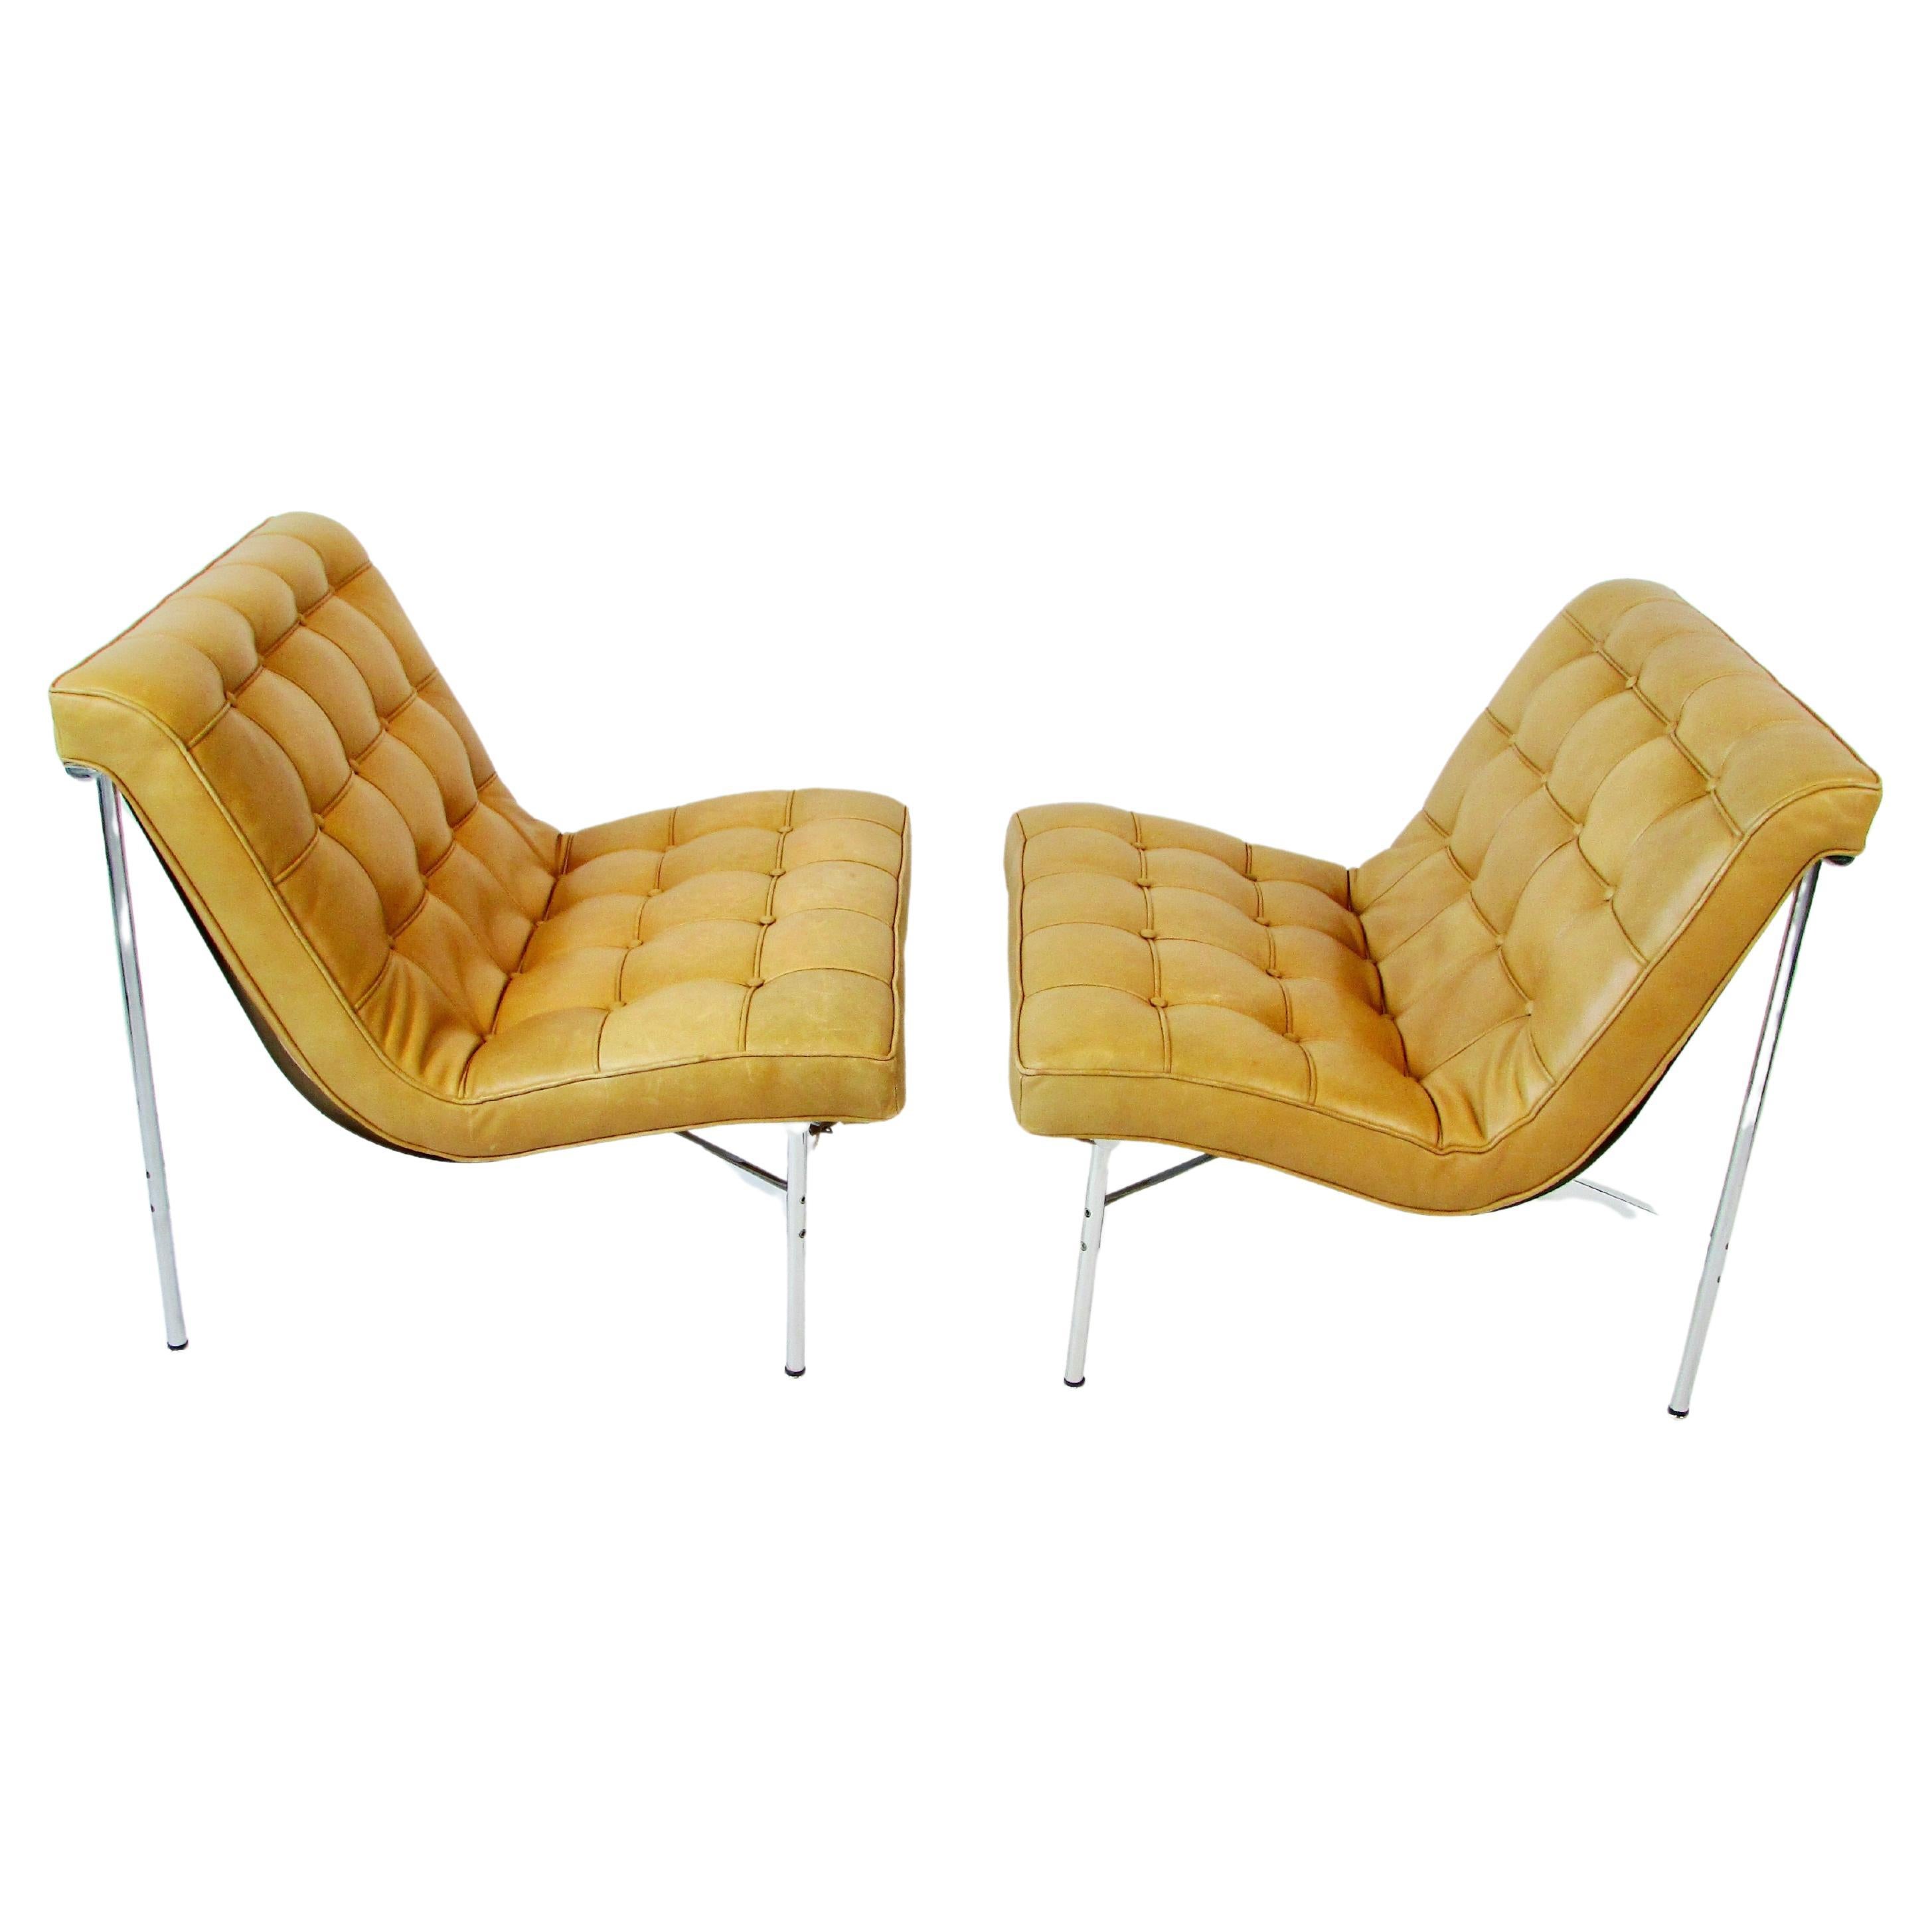 Pair Katavolos Littell Kelley for Laverne button tufted leather lounge chairs 